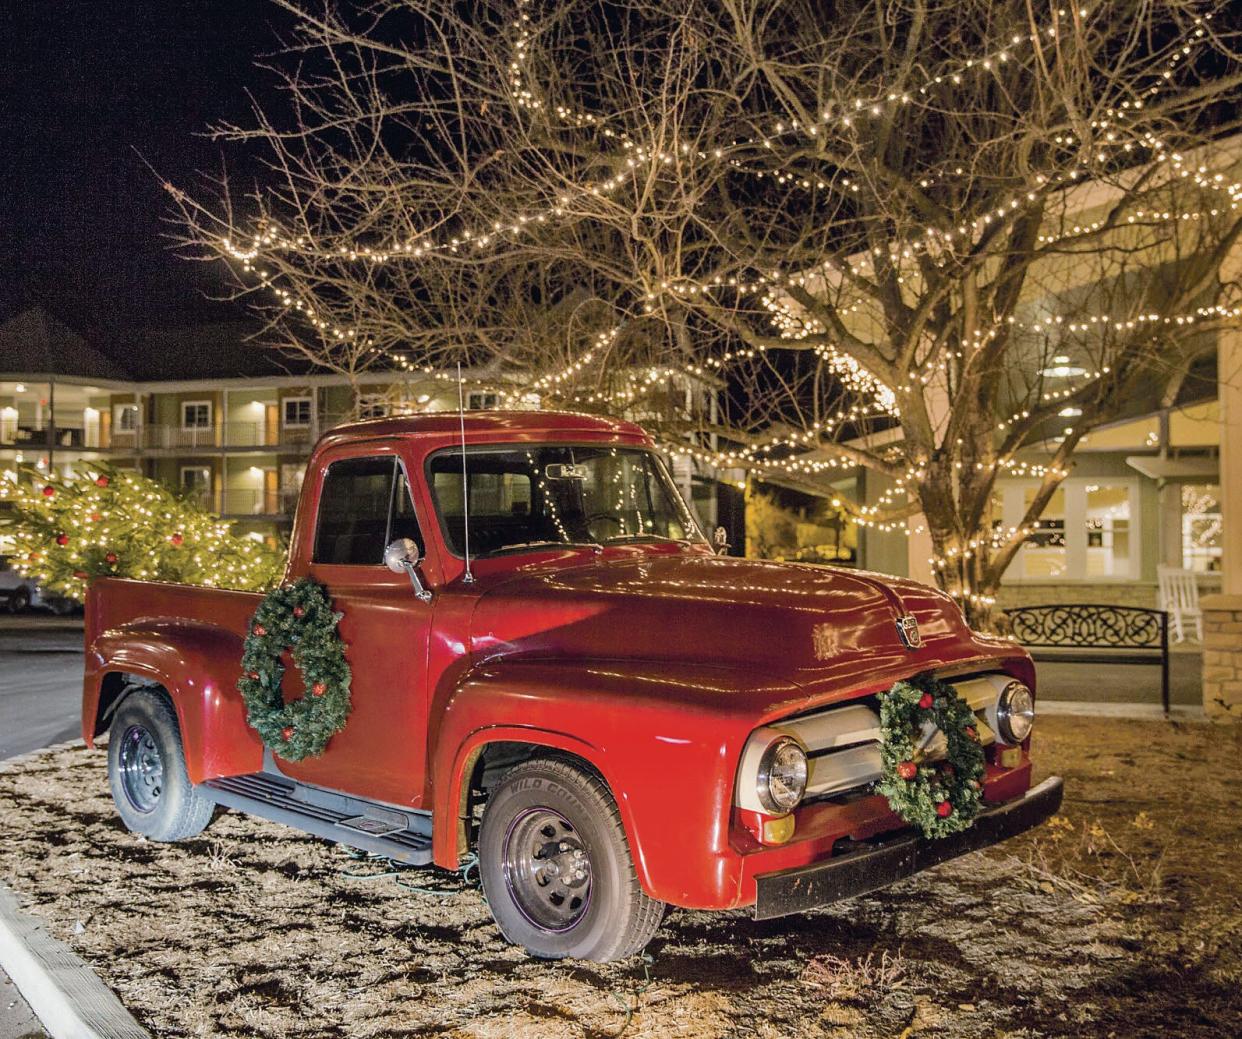 After Dick Jones passed away, his truck was decorated for the holiday in 2017.